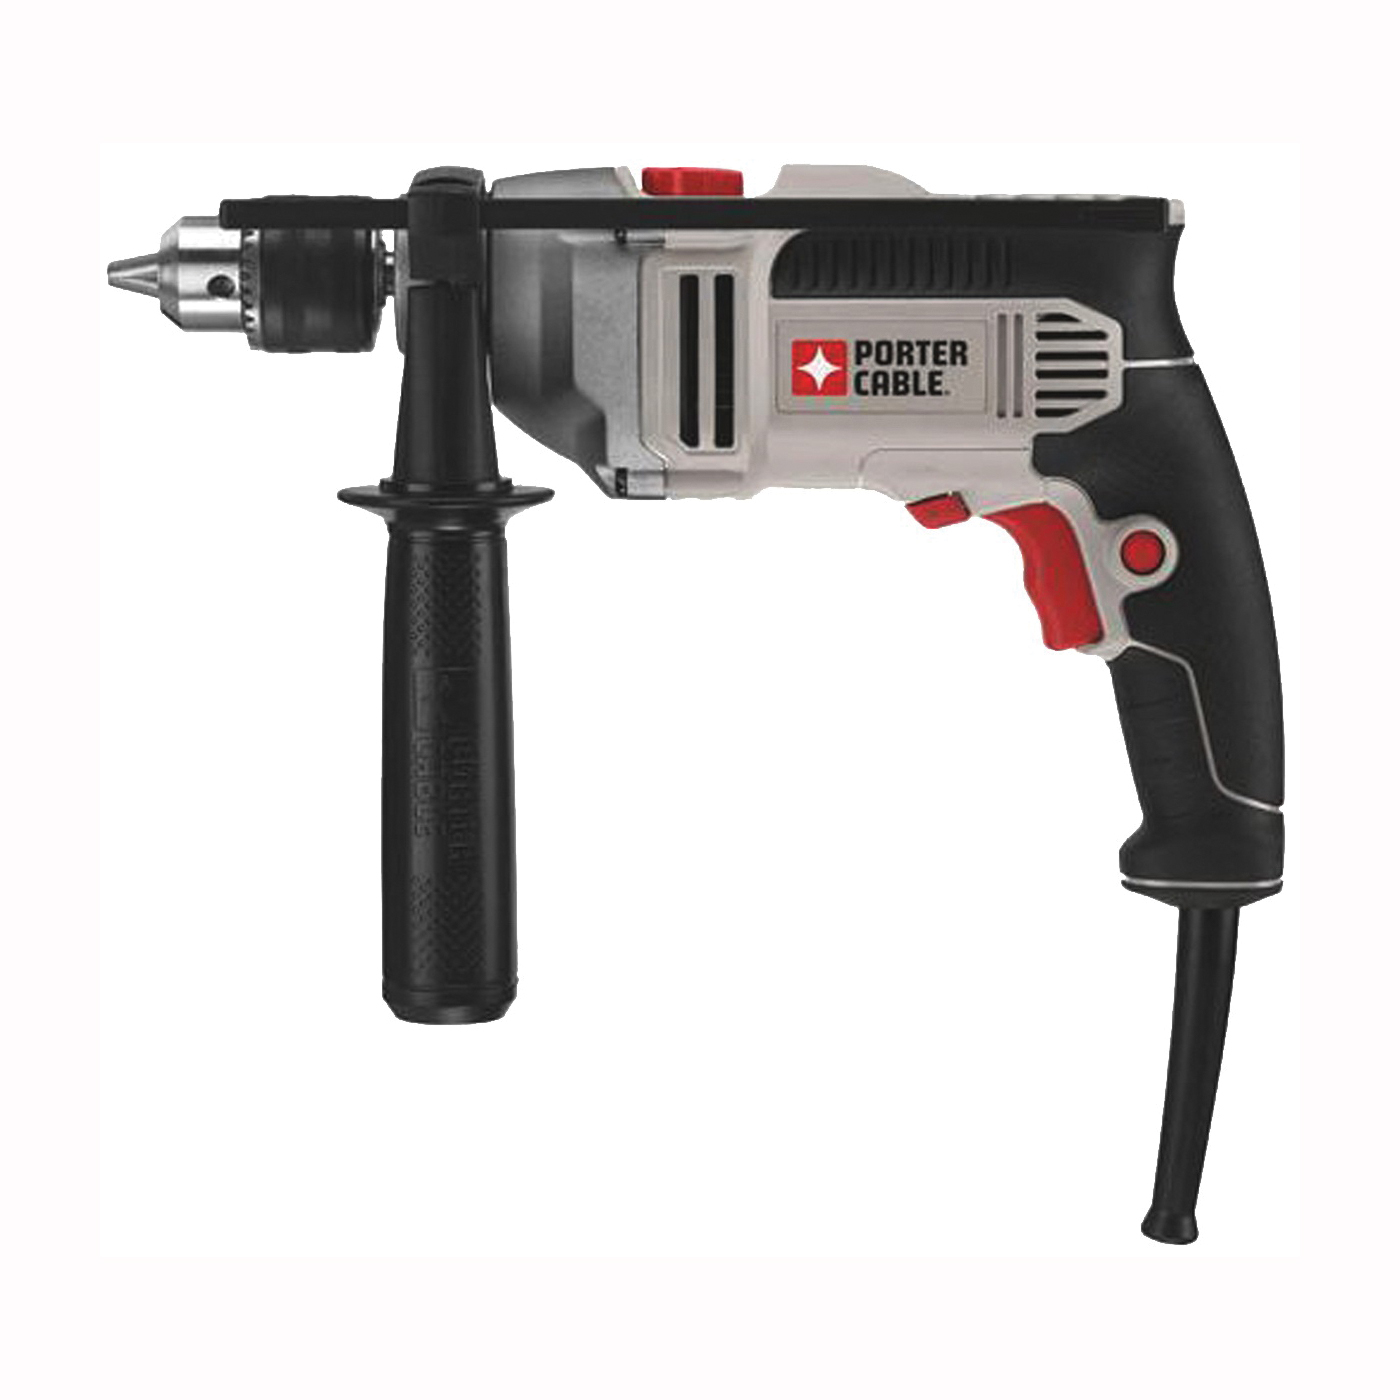 PCE141 Hammer Drill, 7 A, Keyed Chuck, 1/2 in Chuck, 52,700 bpm, 0 to 3100 rpm Speed